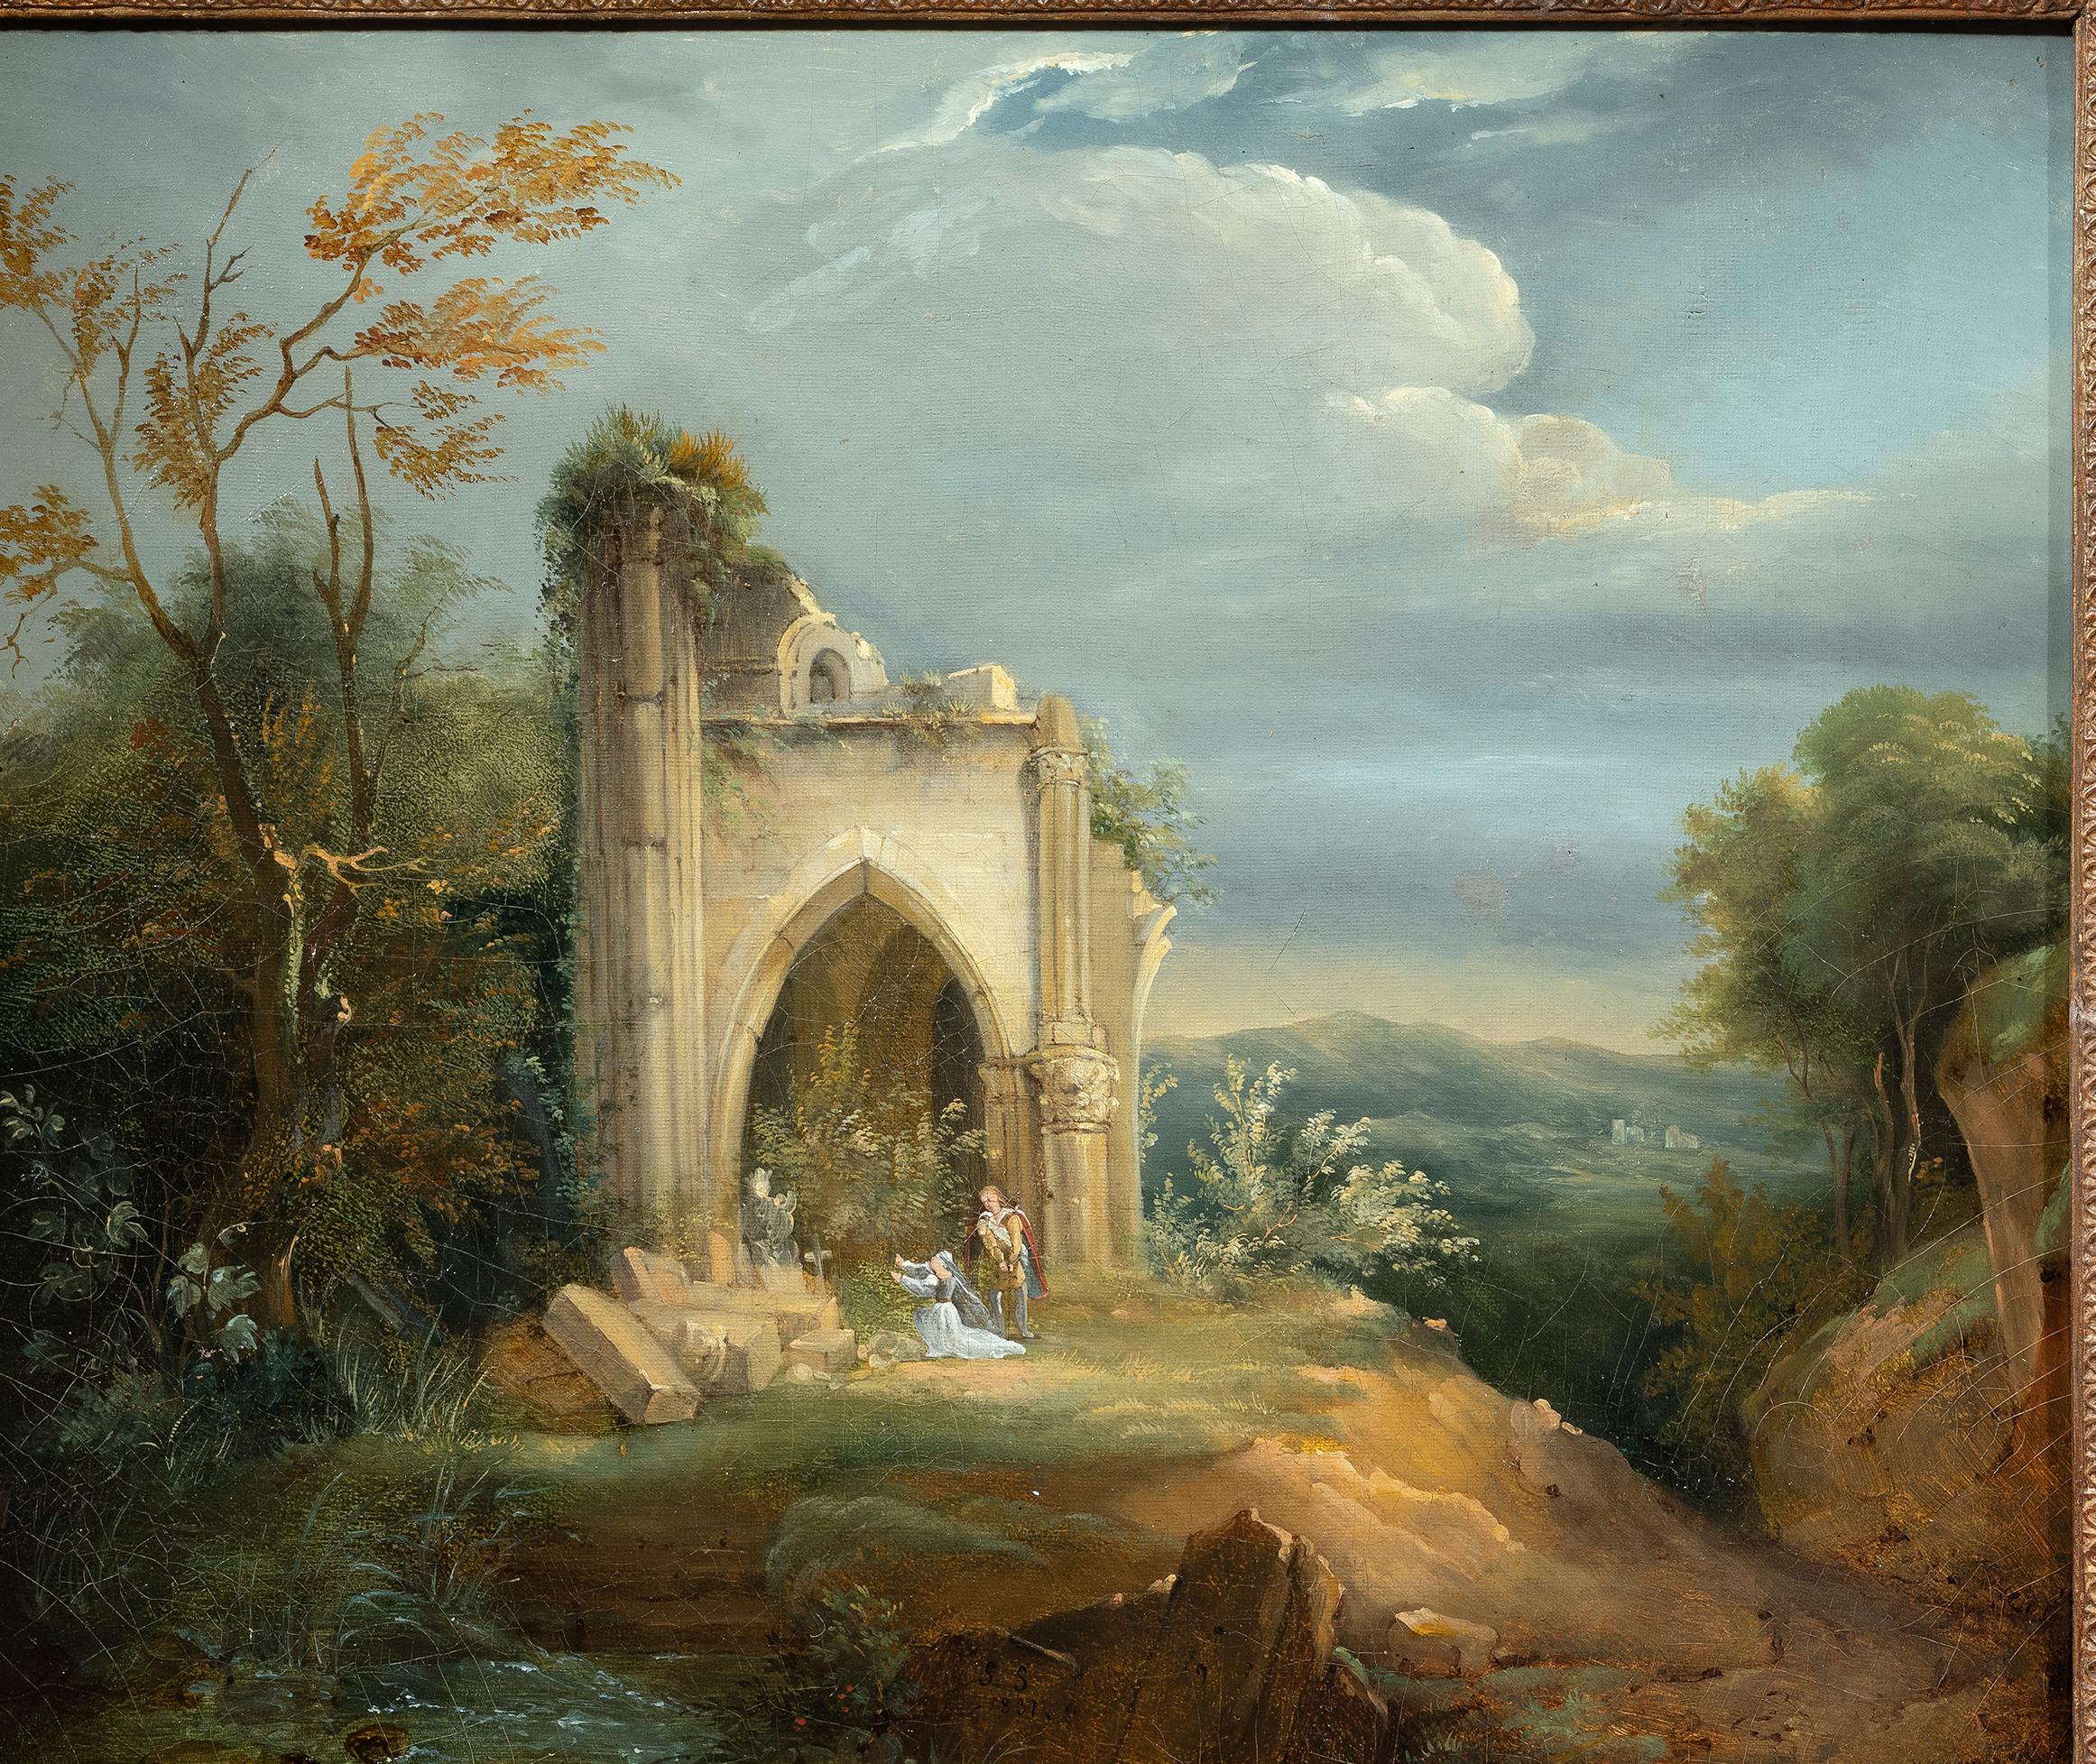 Shipping policy
No additional costs will be added to this order.
Shipping costs will be totally covered by the seller (customs duties included). 

French school, 19th century
Landscape with gothic church ruins
oil painting on canvas
37.7 x 45.7